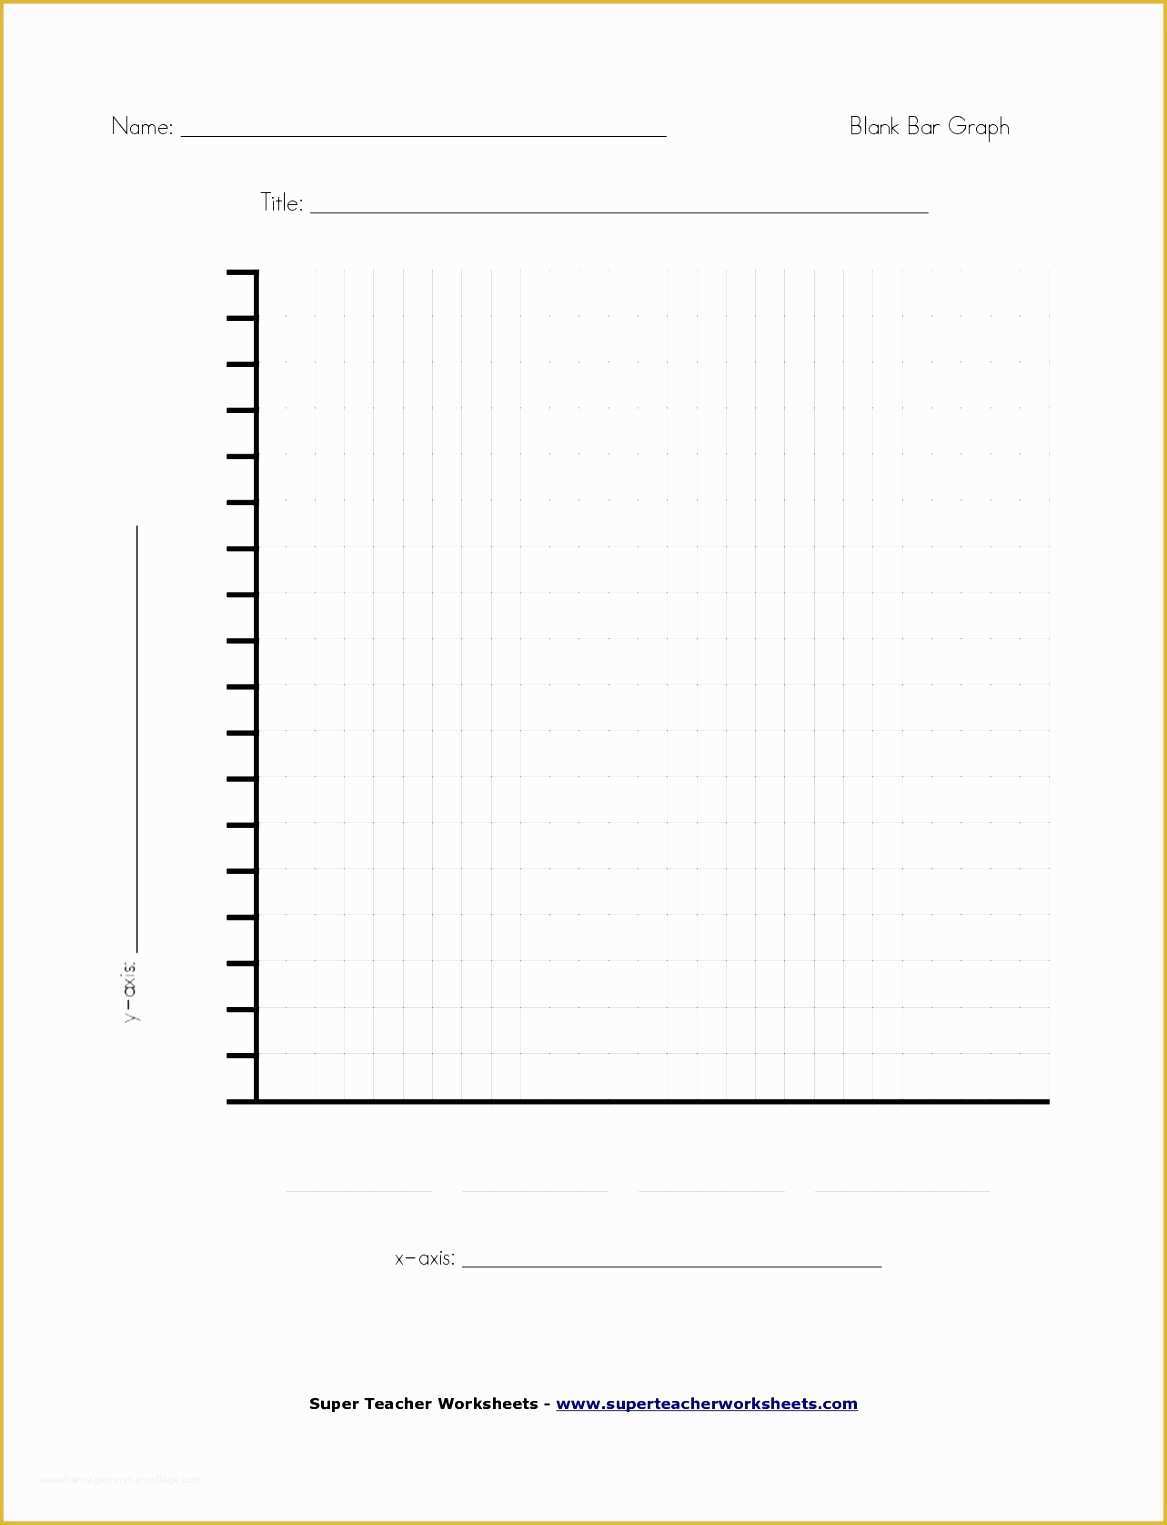 Free Excel Graph Templates Of 7 Excel Bar Graph Templates Exceltemplates Exceltemplates